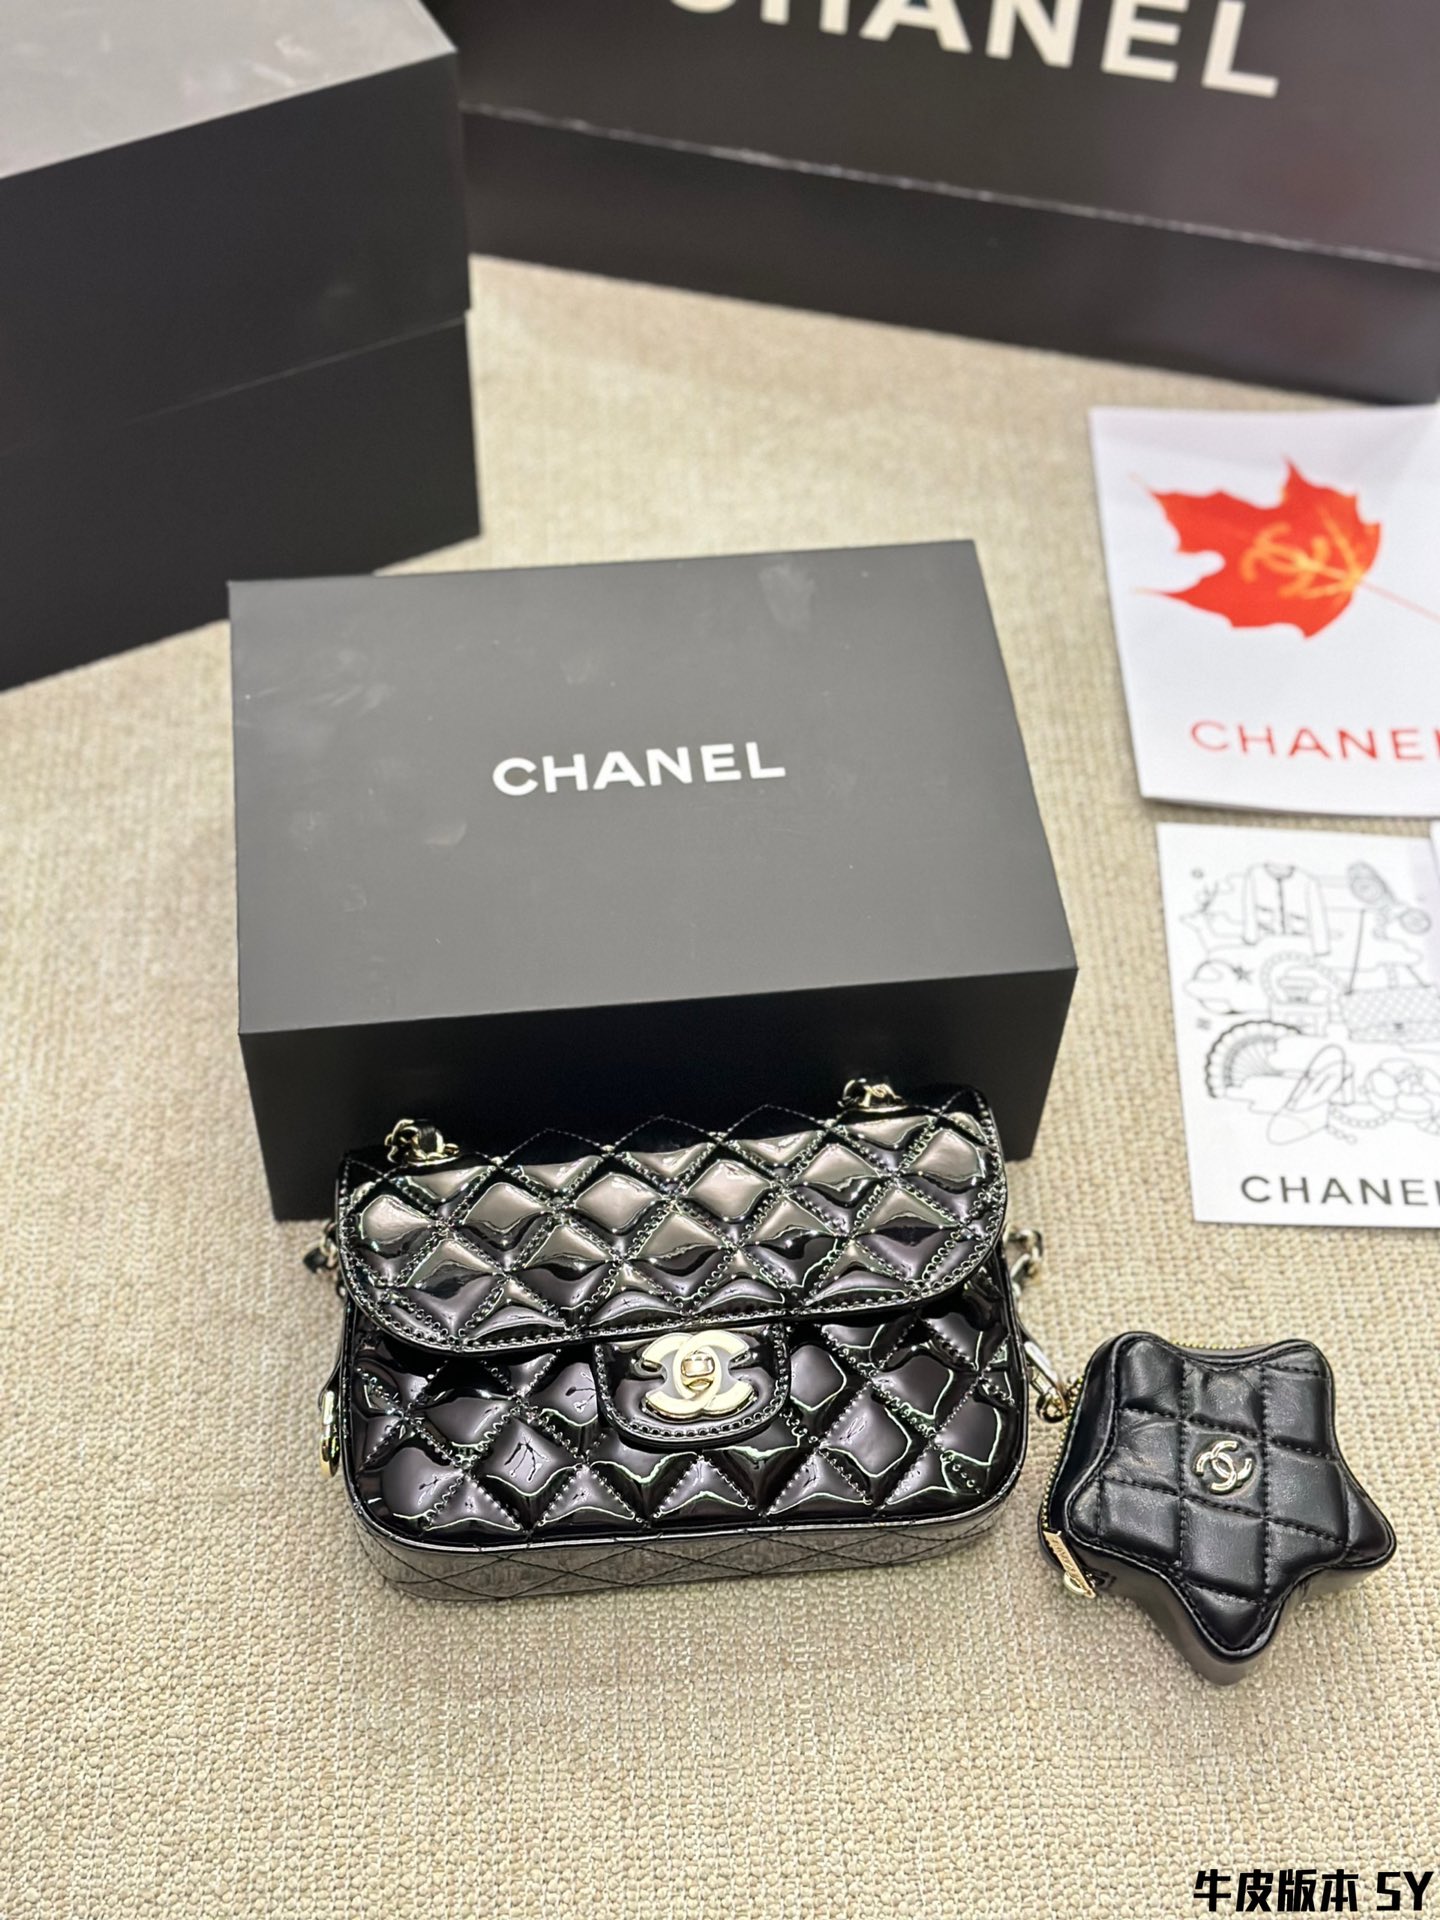 Chanel glossy patent leather flap bag with star charm